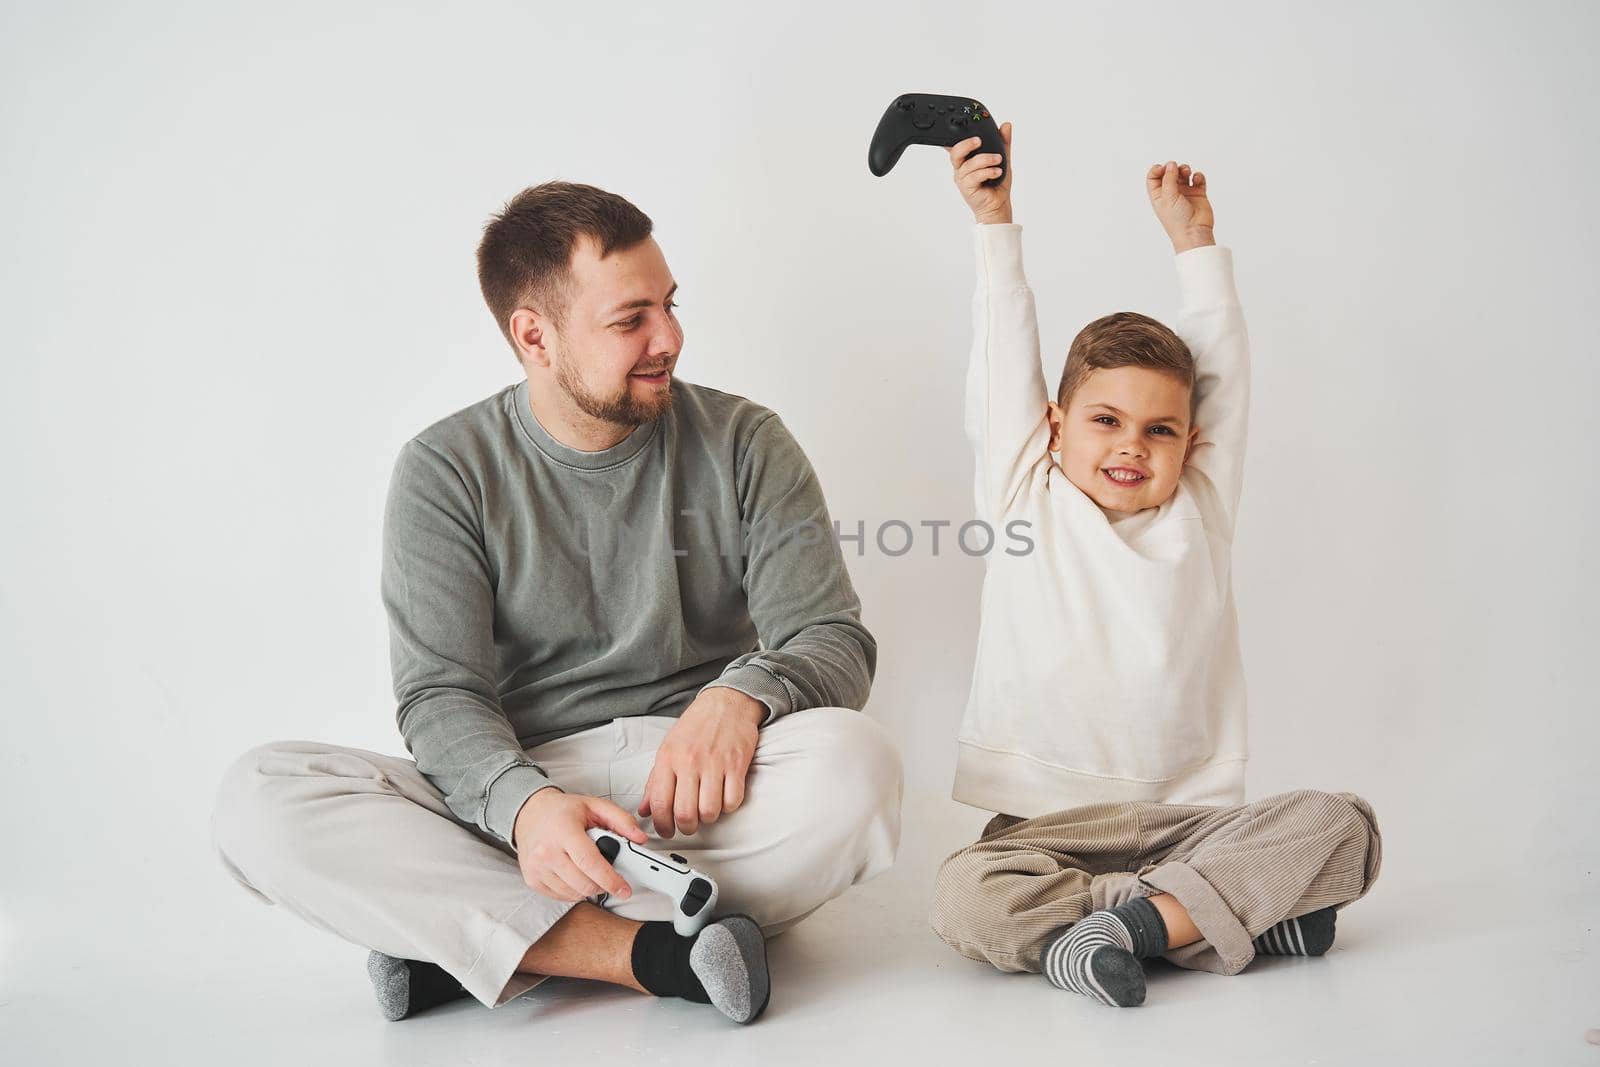 Son won father in game on console. Happy child with gamepad raises his hands up and rejoices in the victory in the game